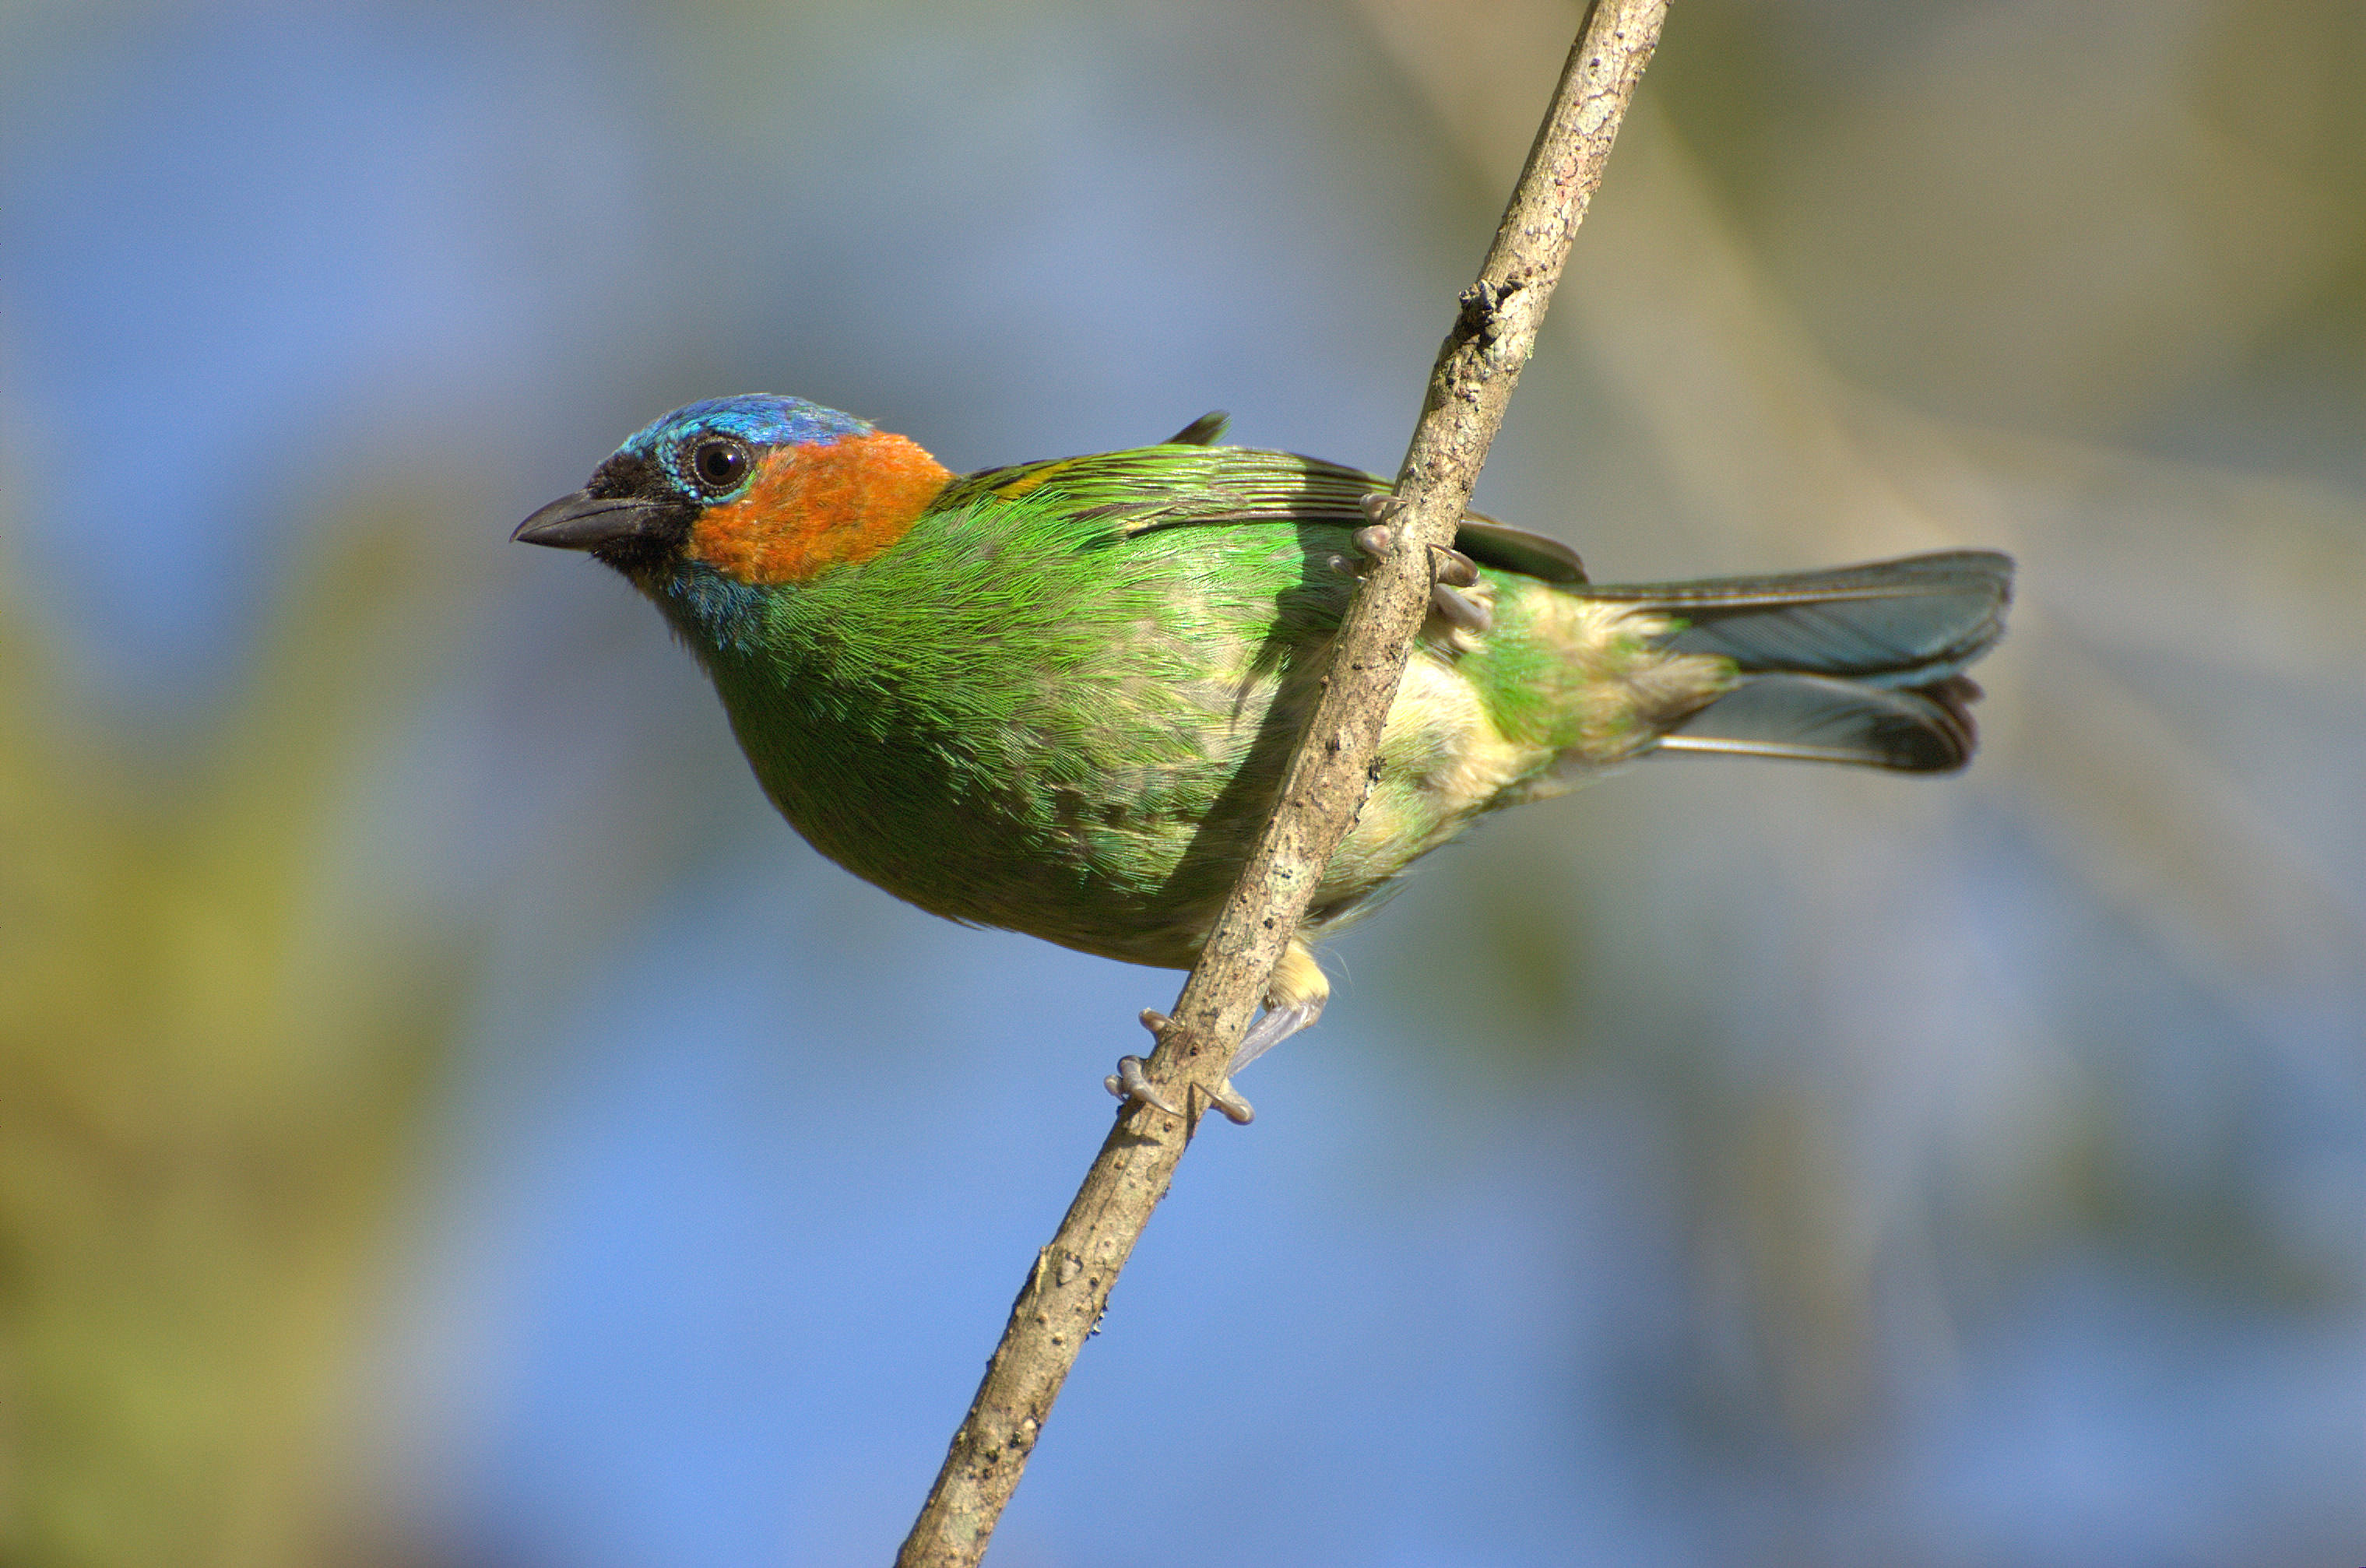 Red-necked Tanager photos and wallpapers. 